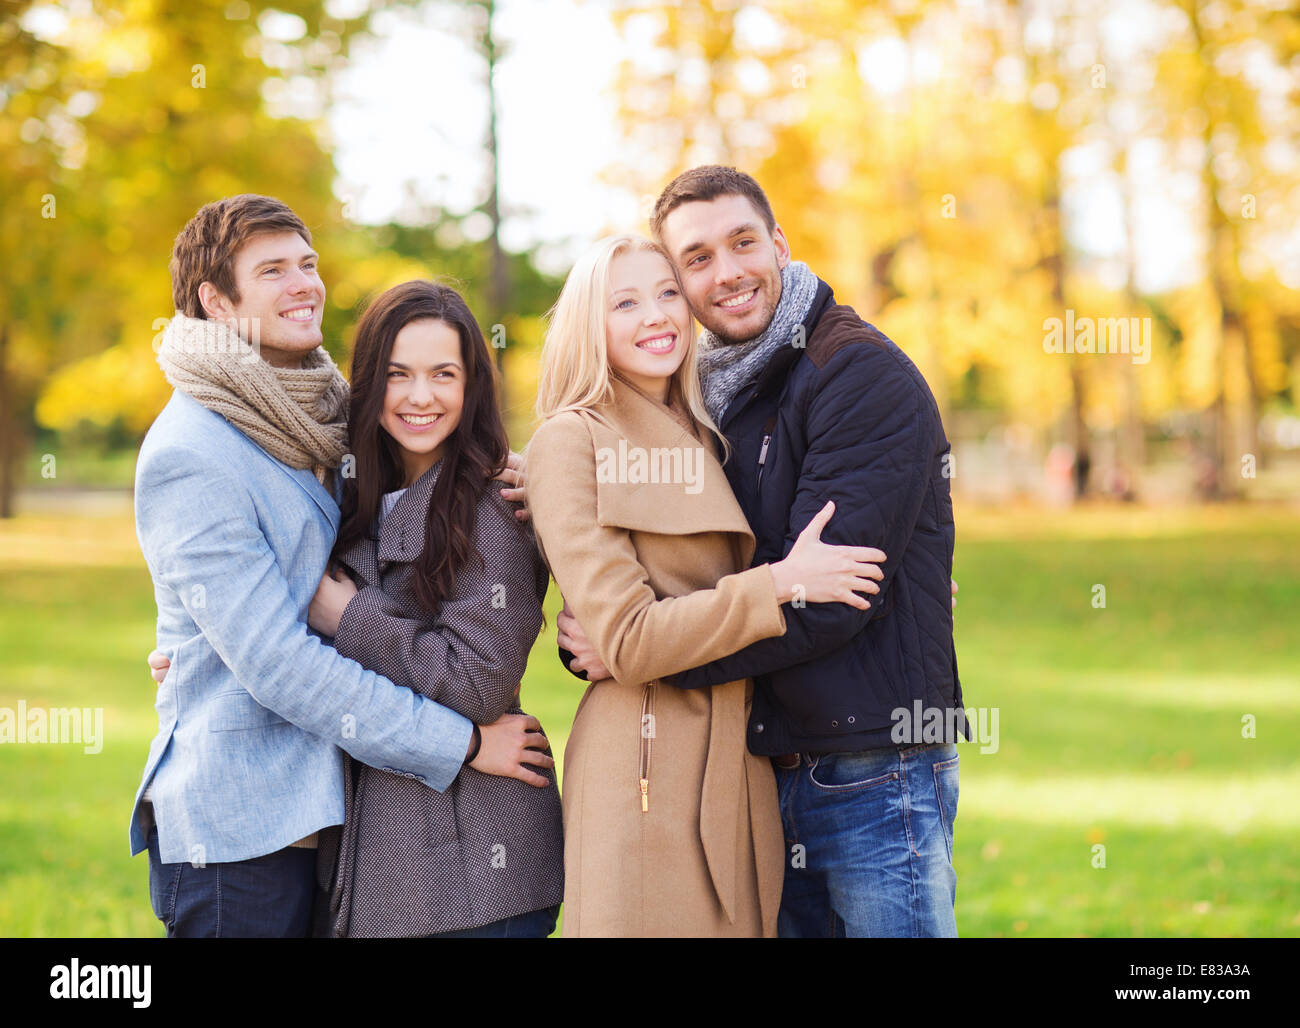 group of smiling men and women in autumn park Stock Photo